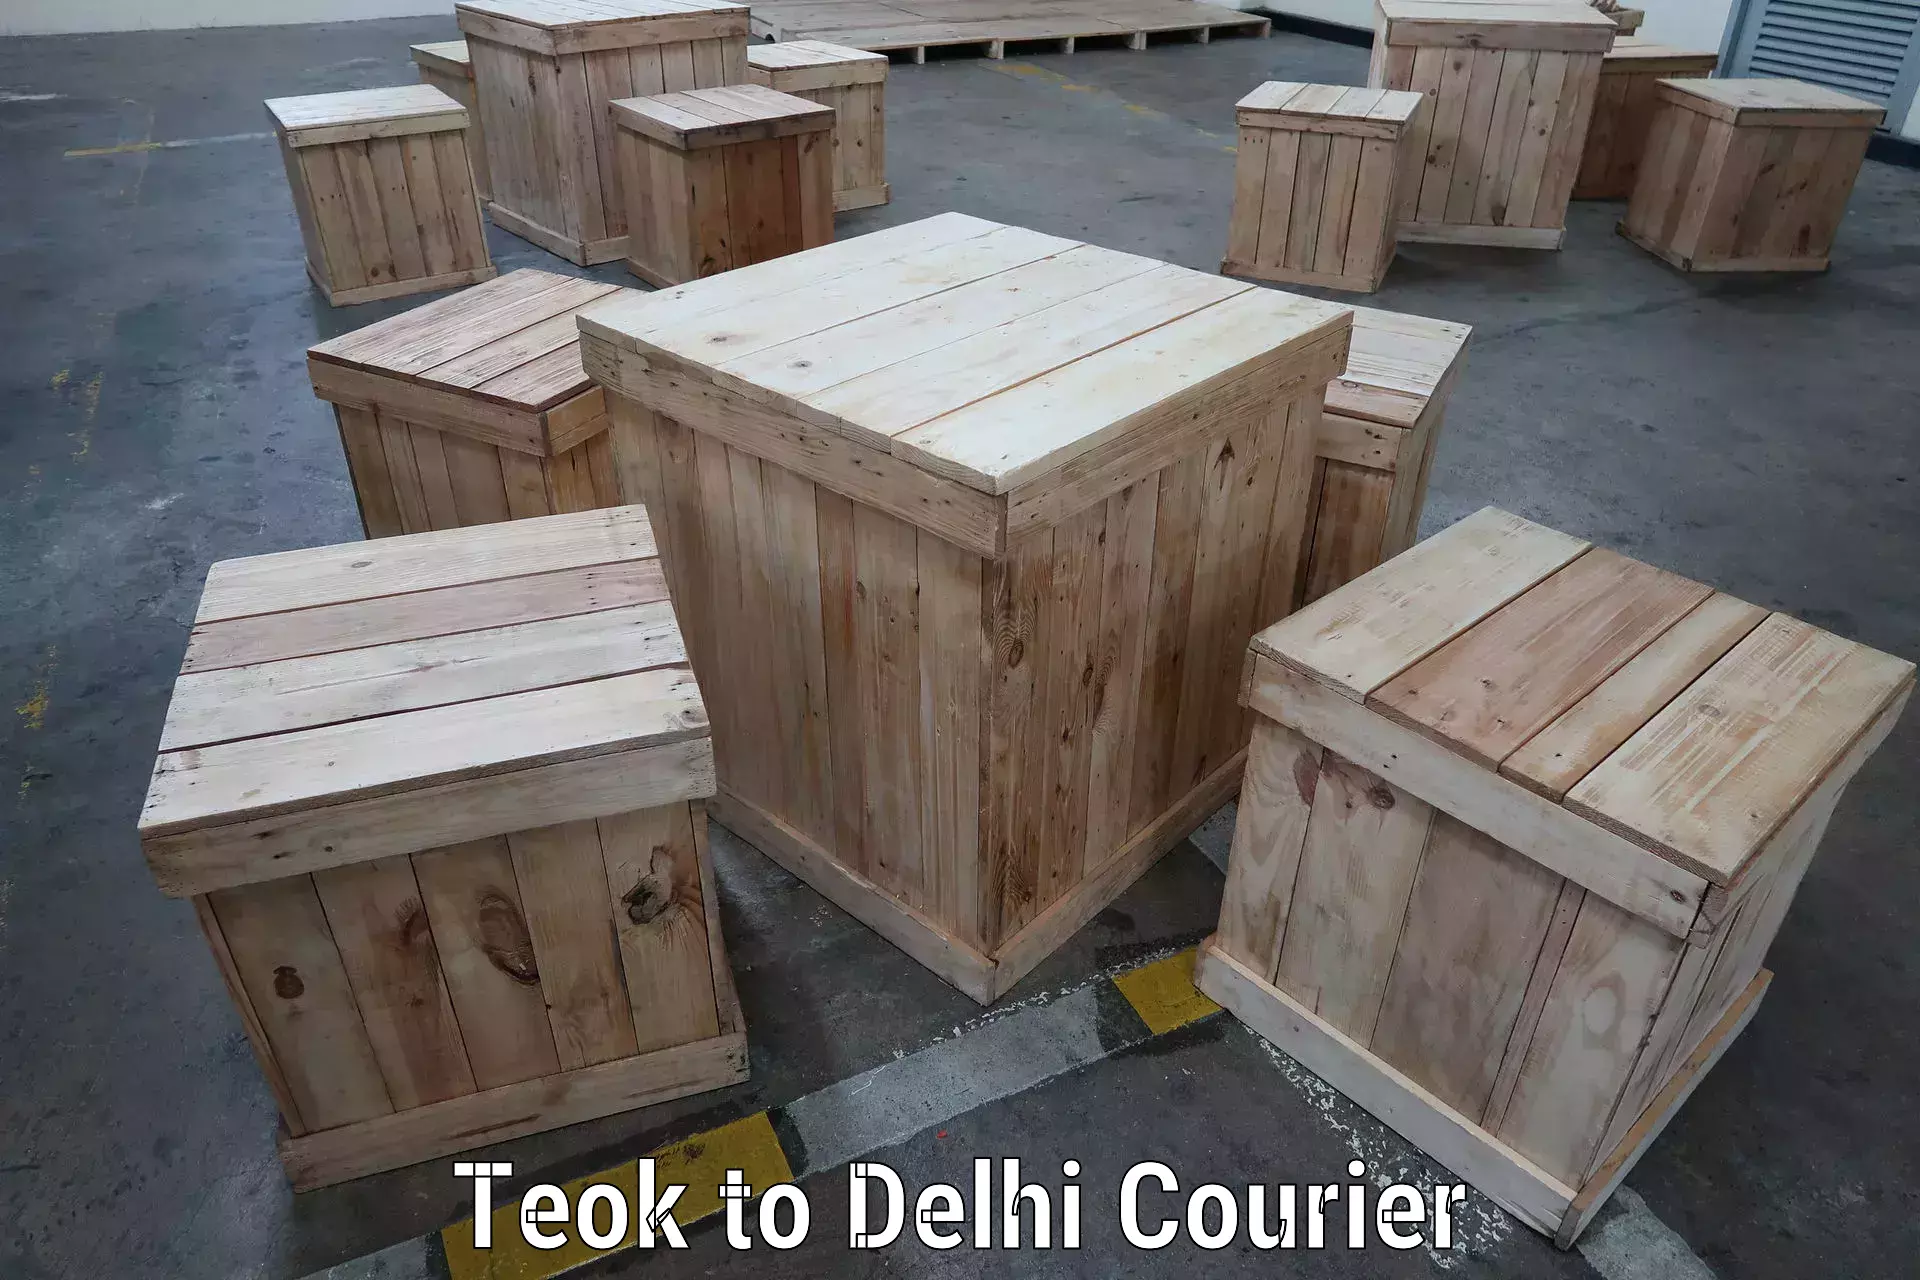 Tech-enabled shipping Teok to Delhi